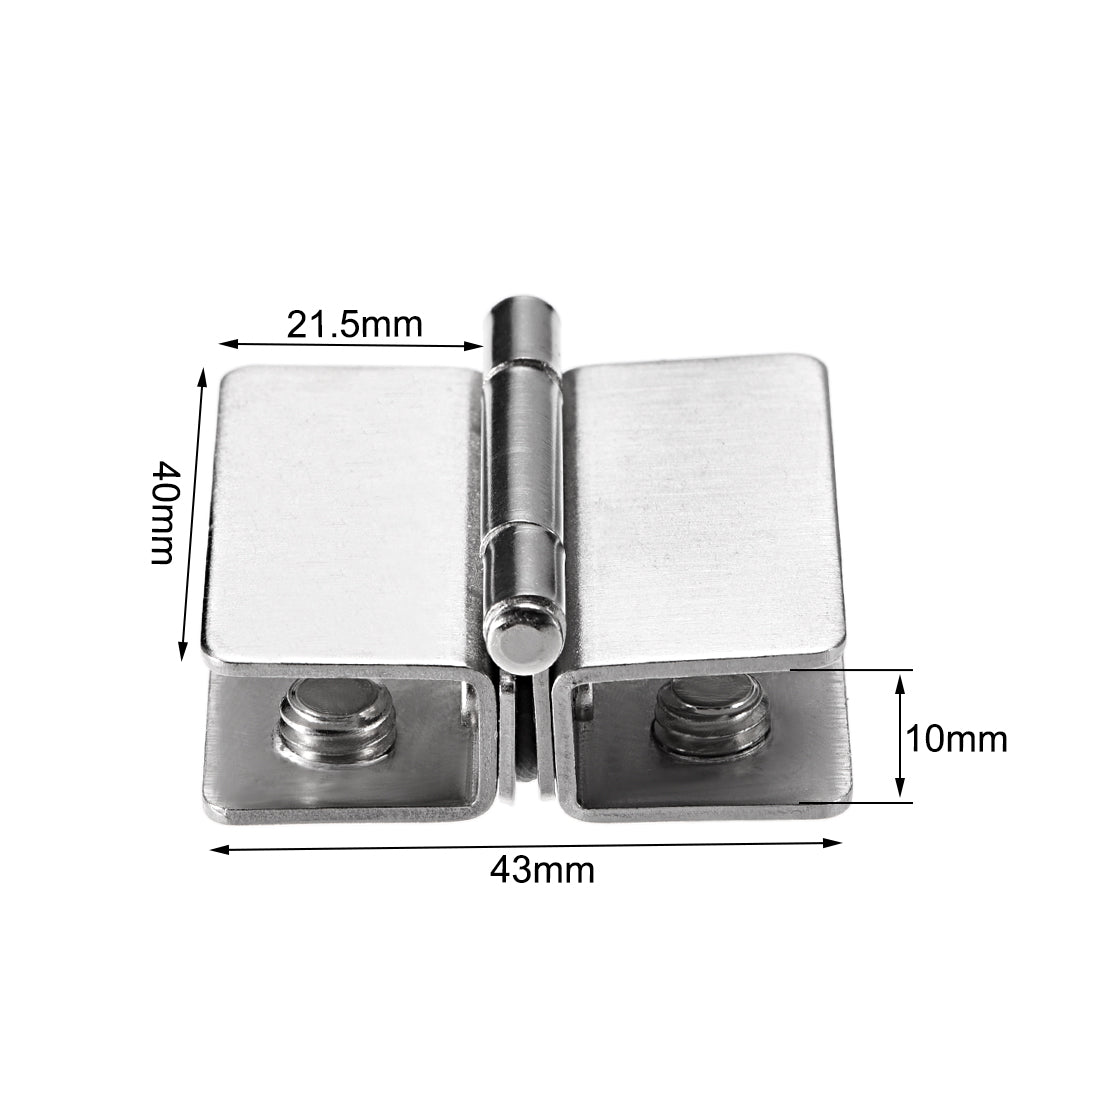 uxcell Uxcell Glass Hinge Cabinet Door Hinge Glass Clamp ,Stainless Steel , for 5-8mm Thickness 2Pcs